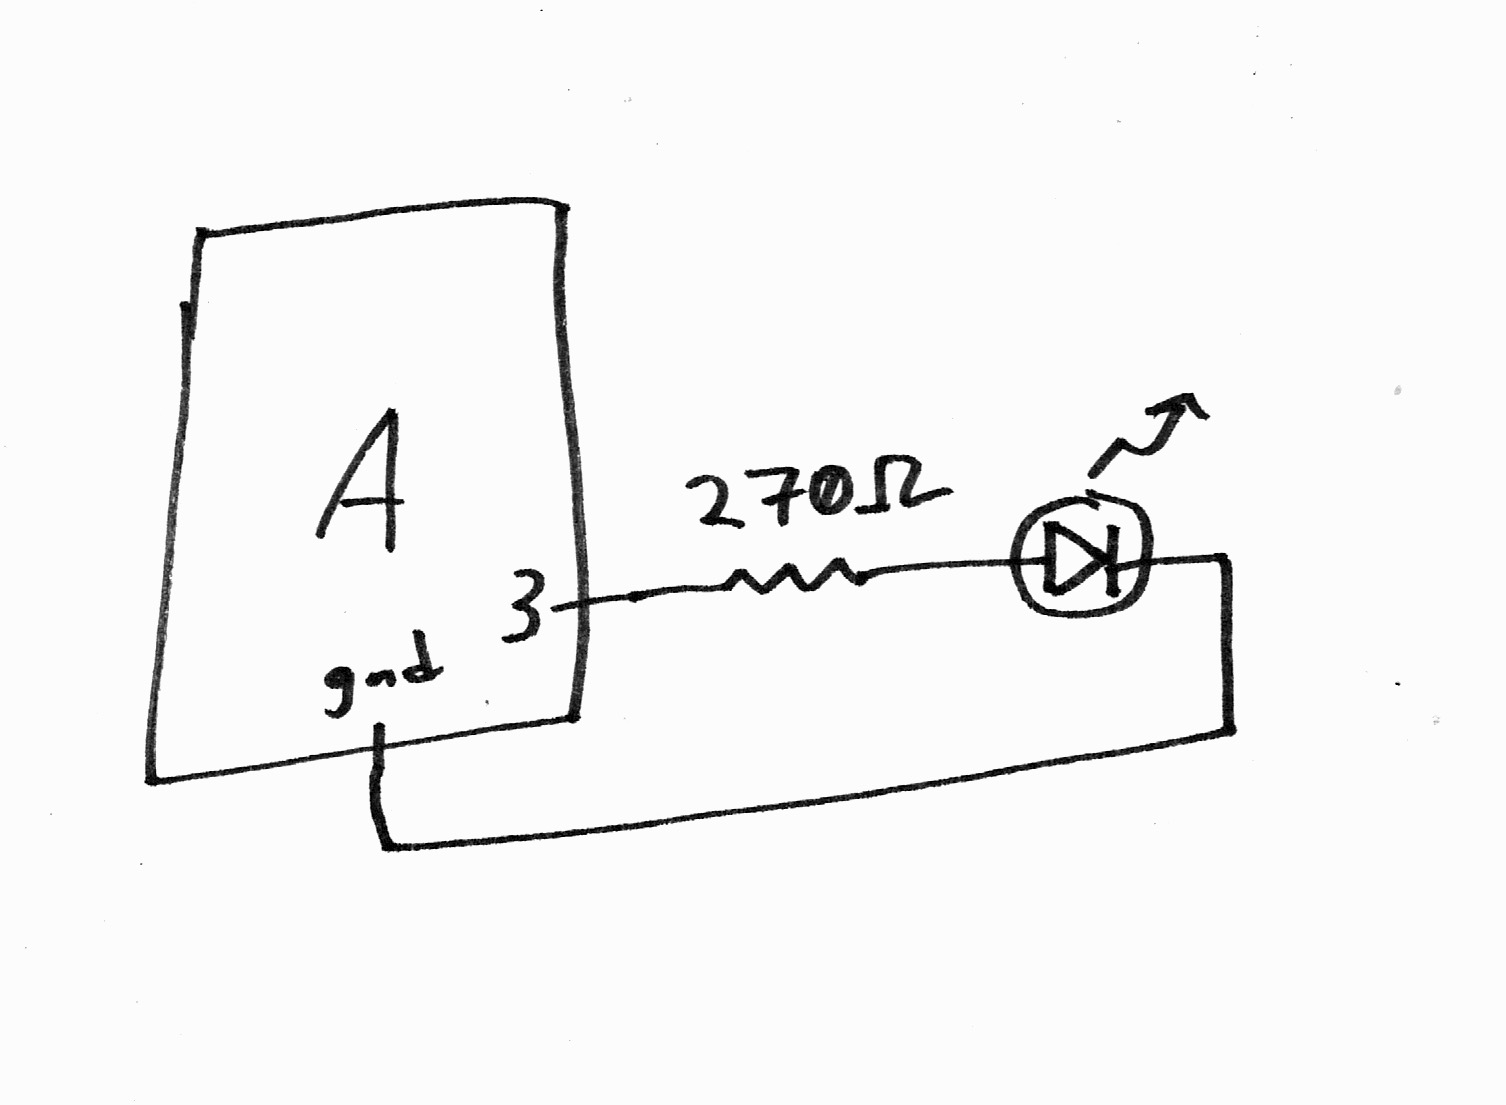 Schematic illustrating an Arduino with pin 3 connected to a 270Ω resistor, to the positive leg of an LED, back to the Arduino's ground